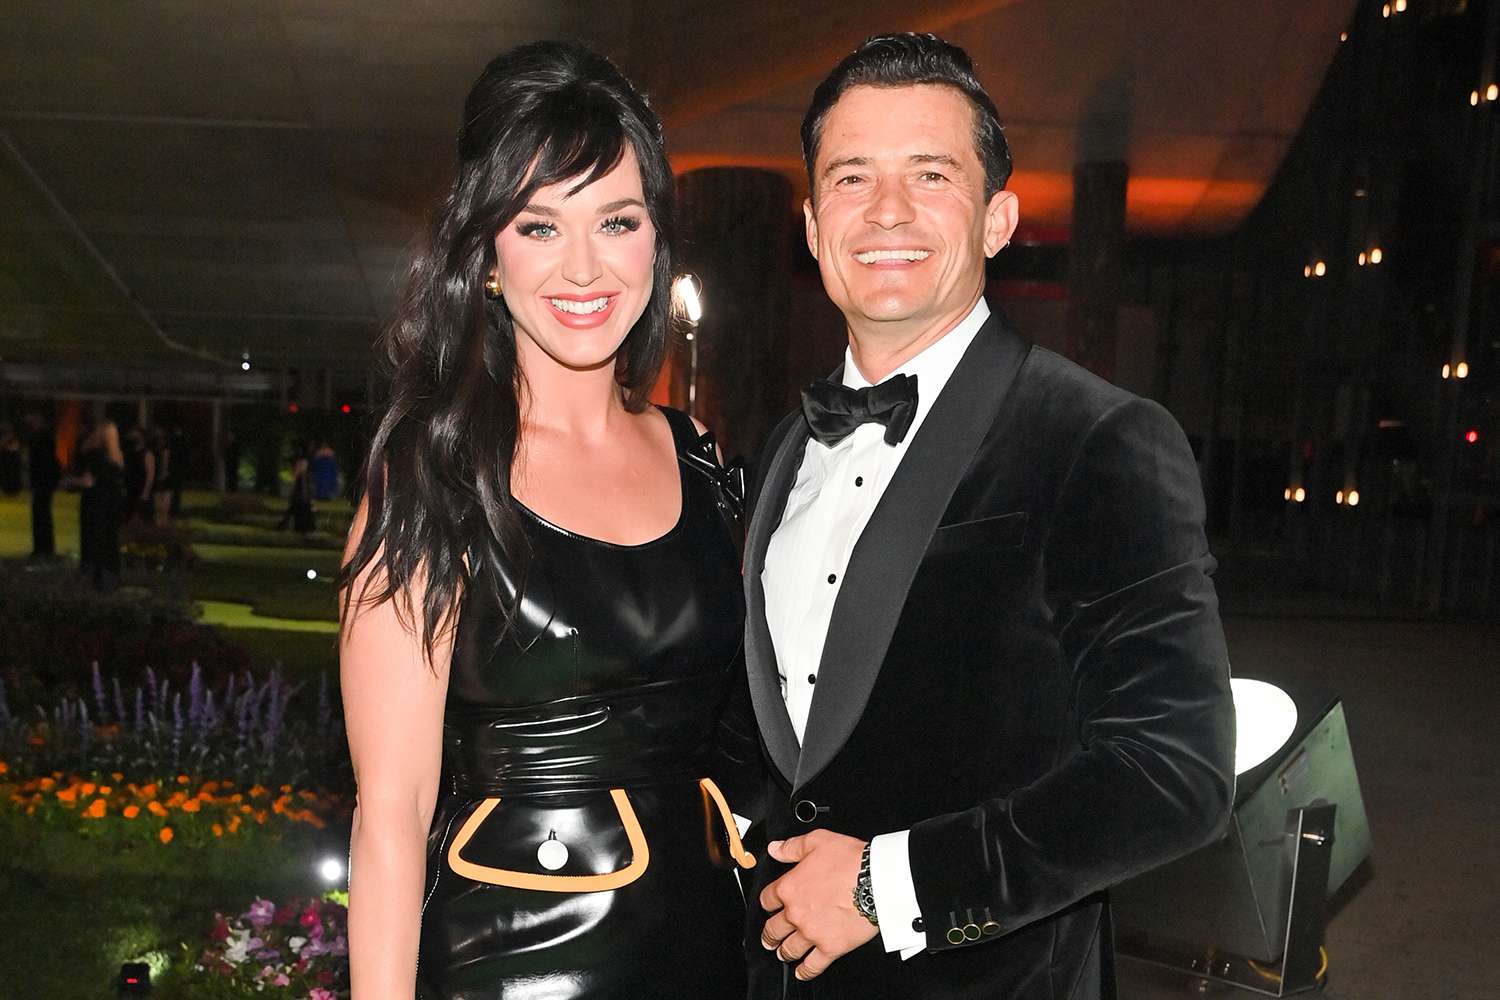 Katy Perry and Orlando Bloom attend the Academy Museum of Motion Pictures: Opening Gala